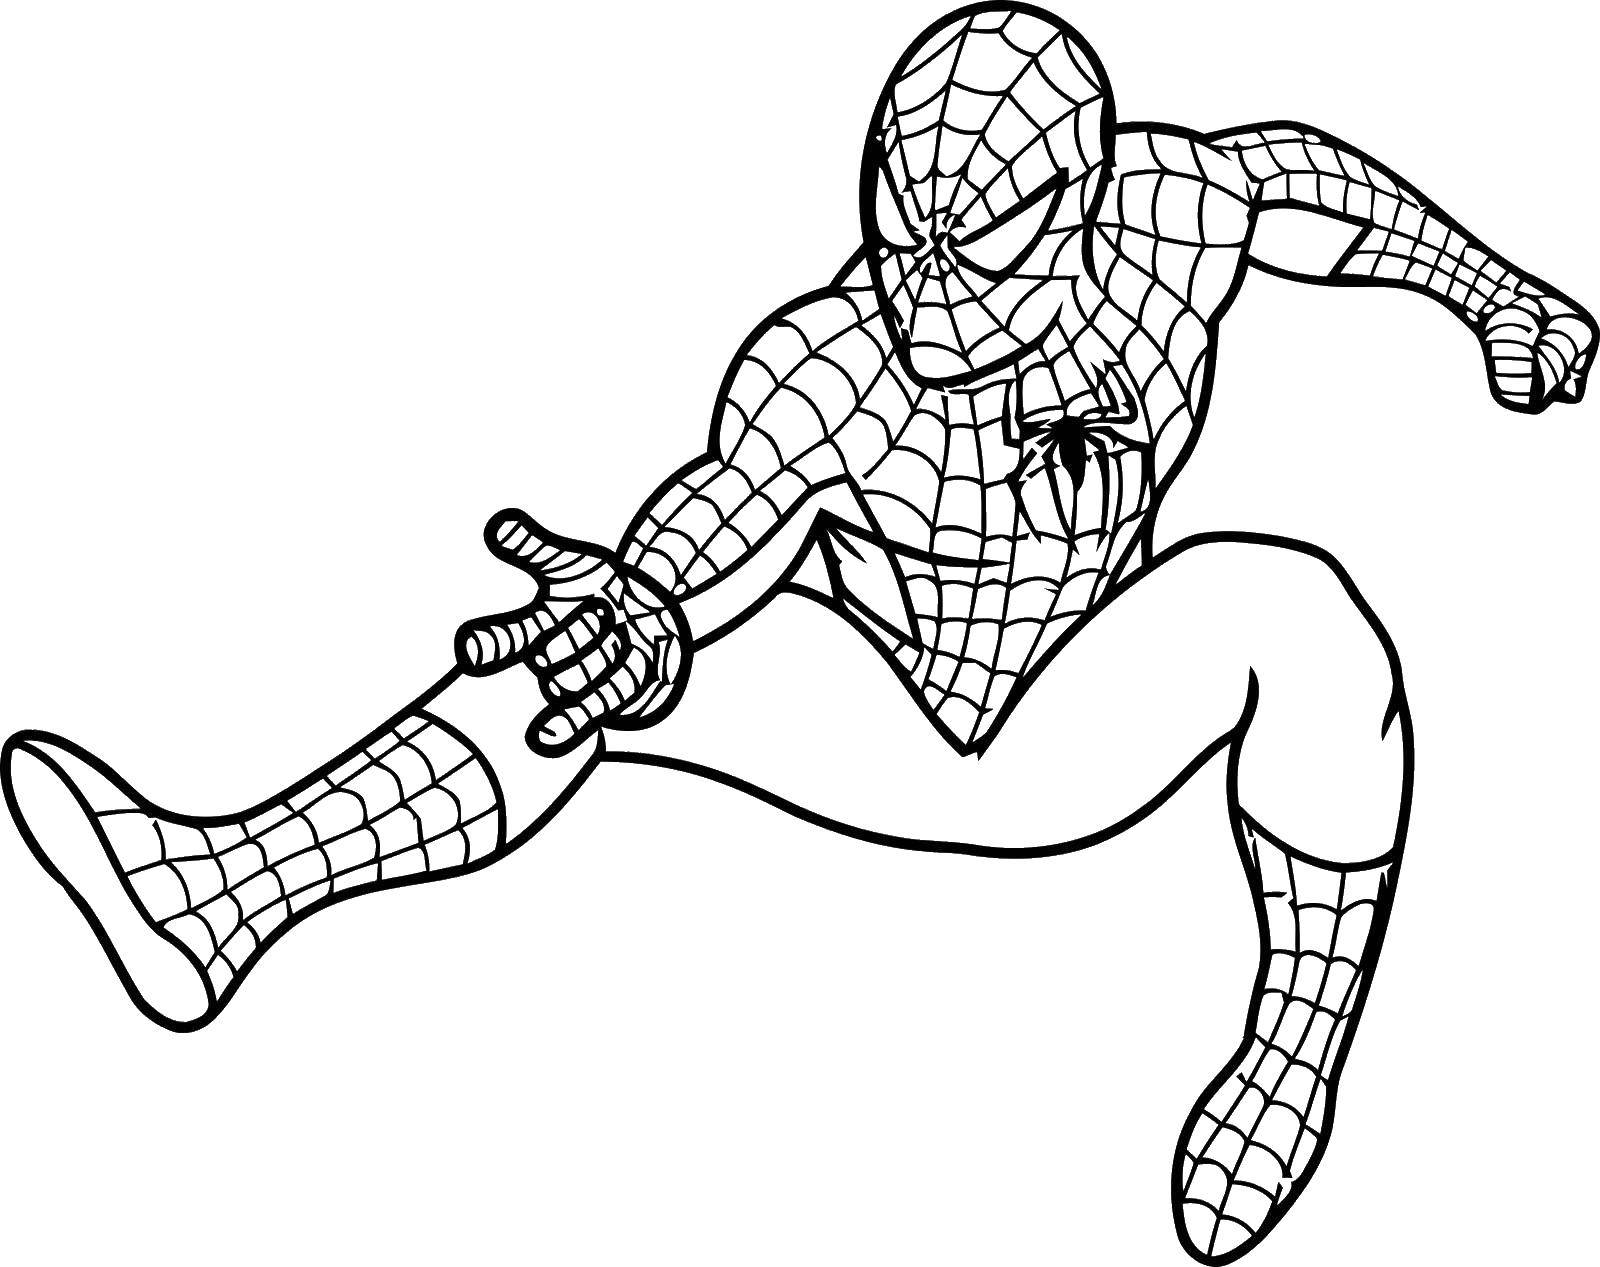 Coloring Spiderman produces a web.. Category Comics. Tags:  Comics, Spider-Man, Spider-Man.